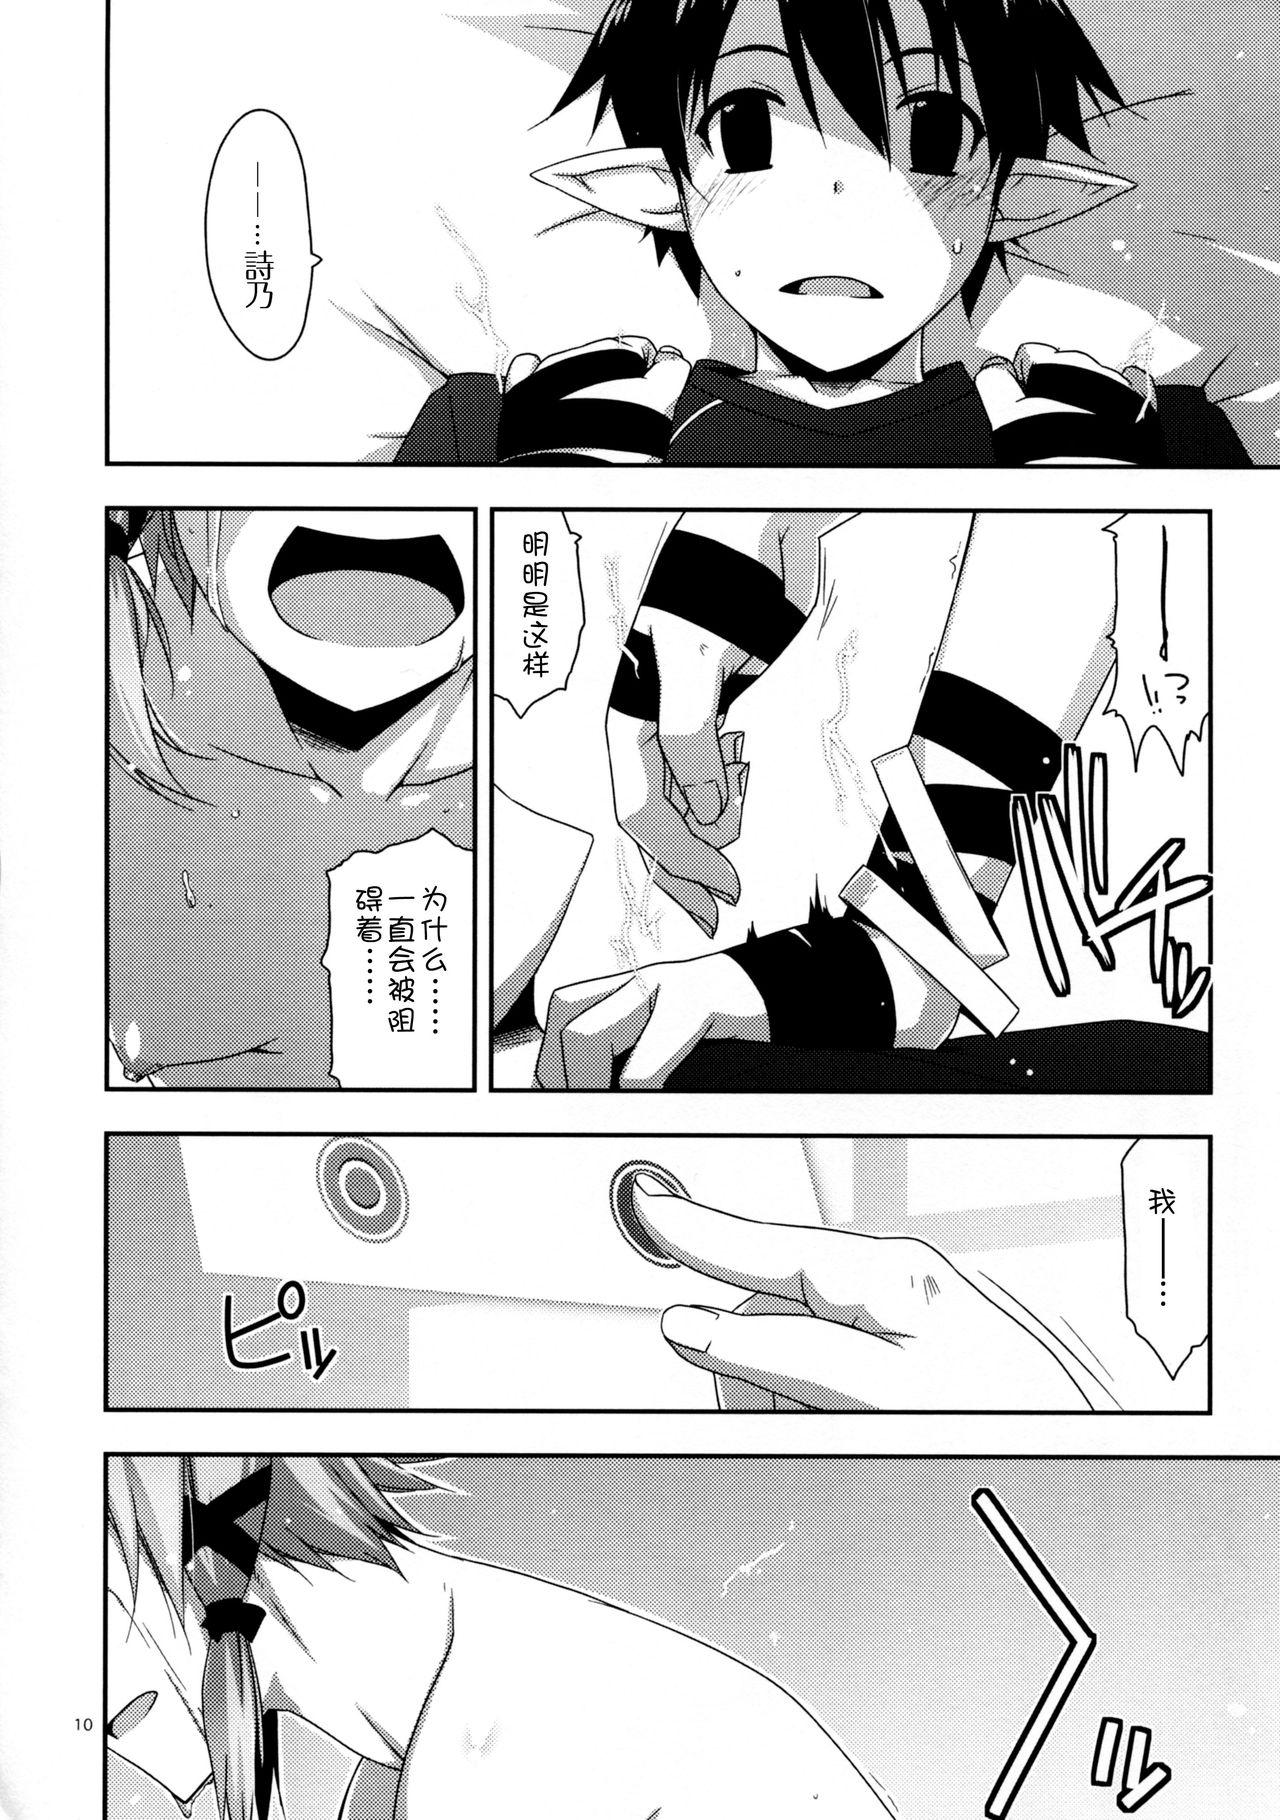 Ikillitts Case closed. - Sword art online Pounding - Page 11